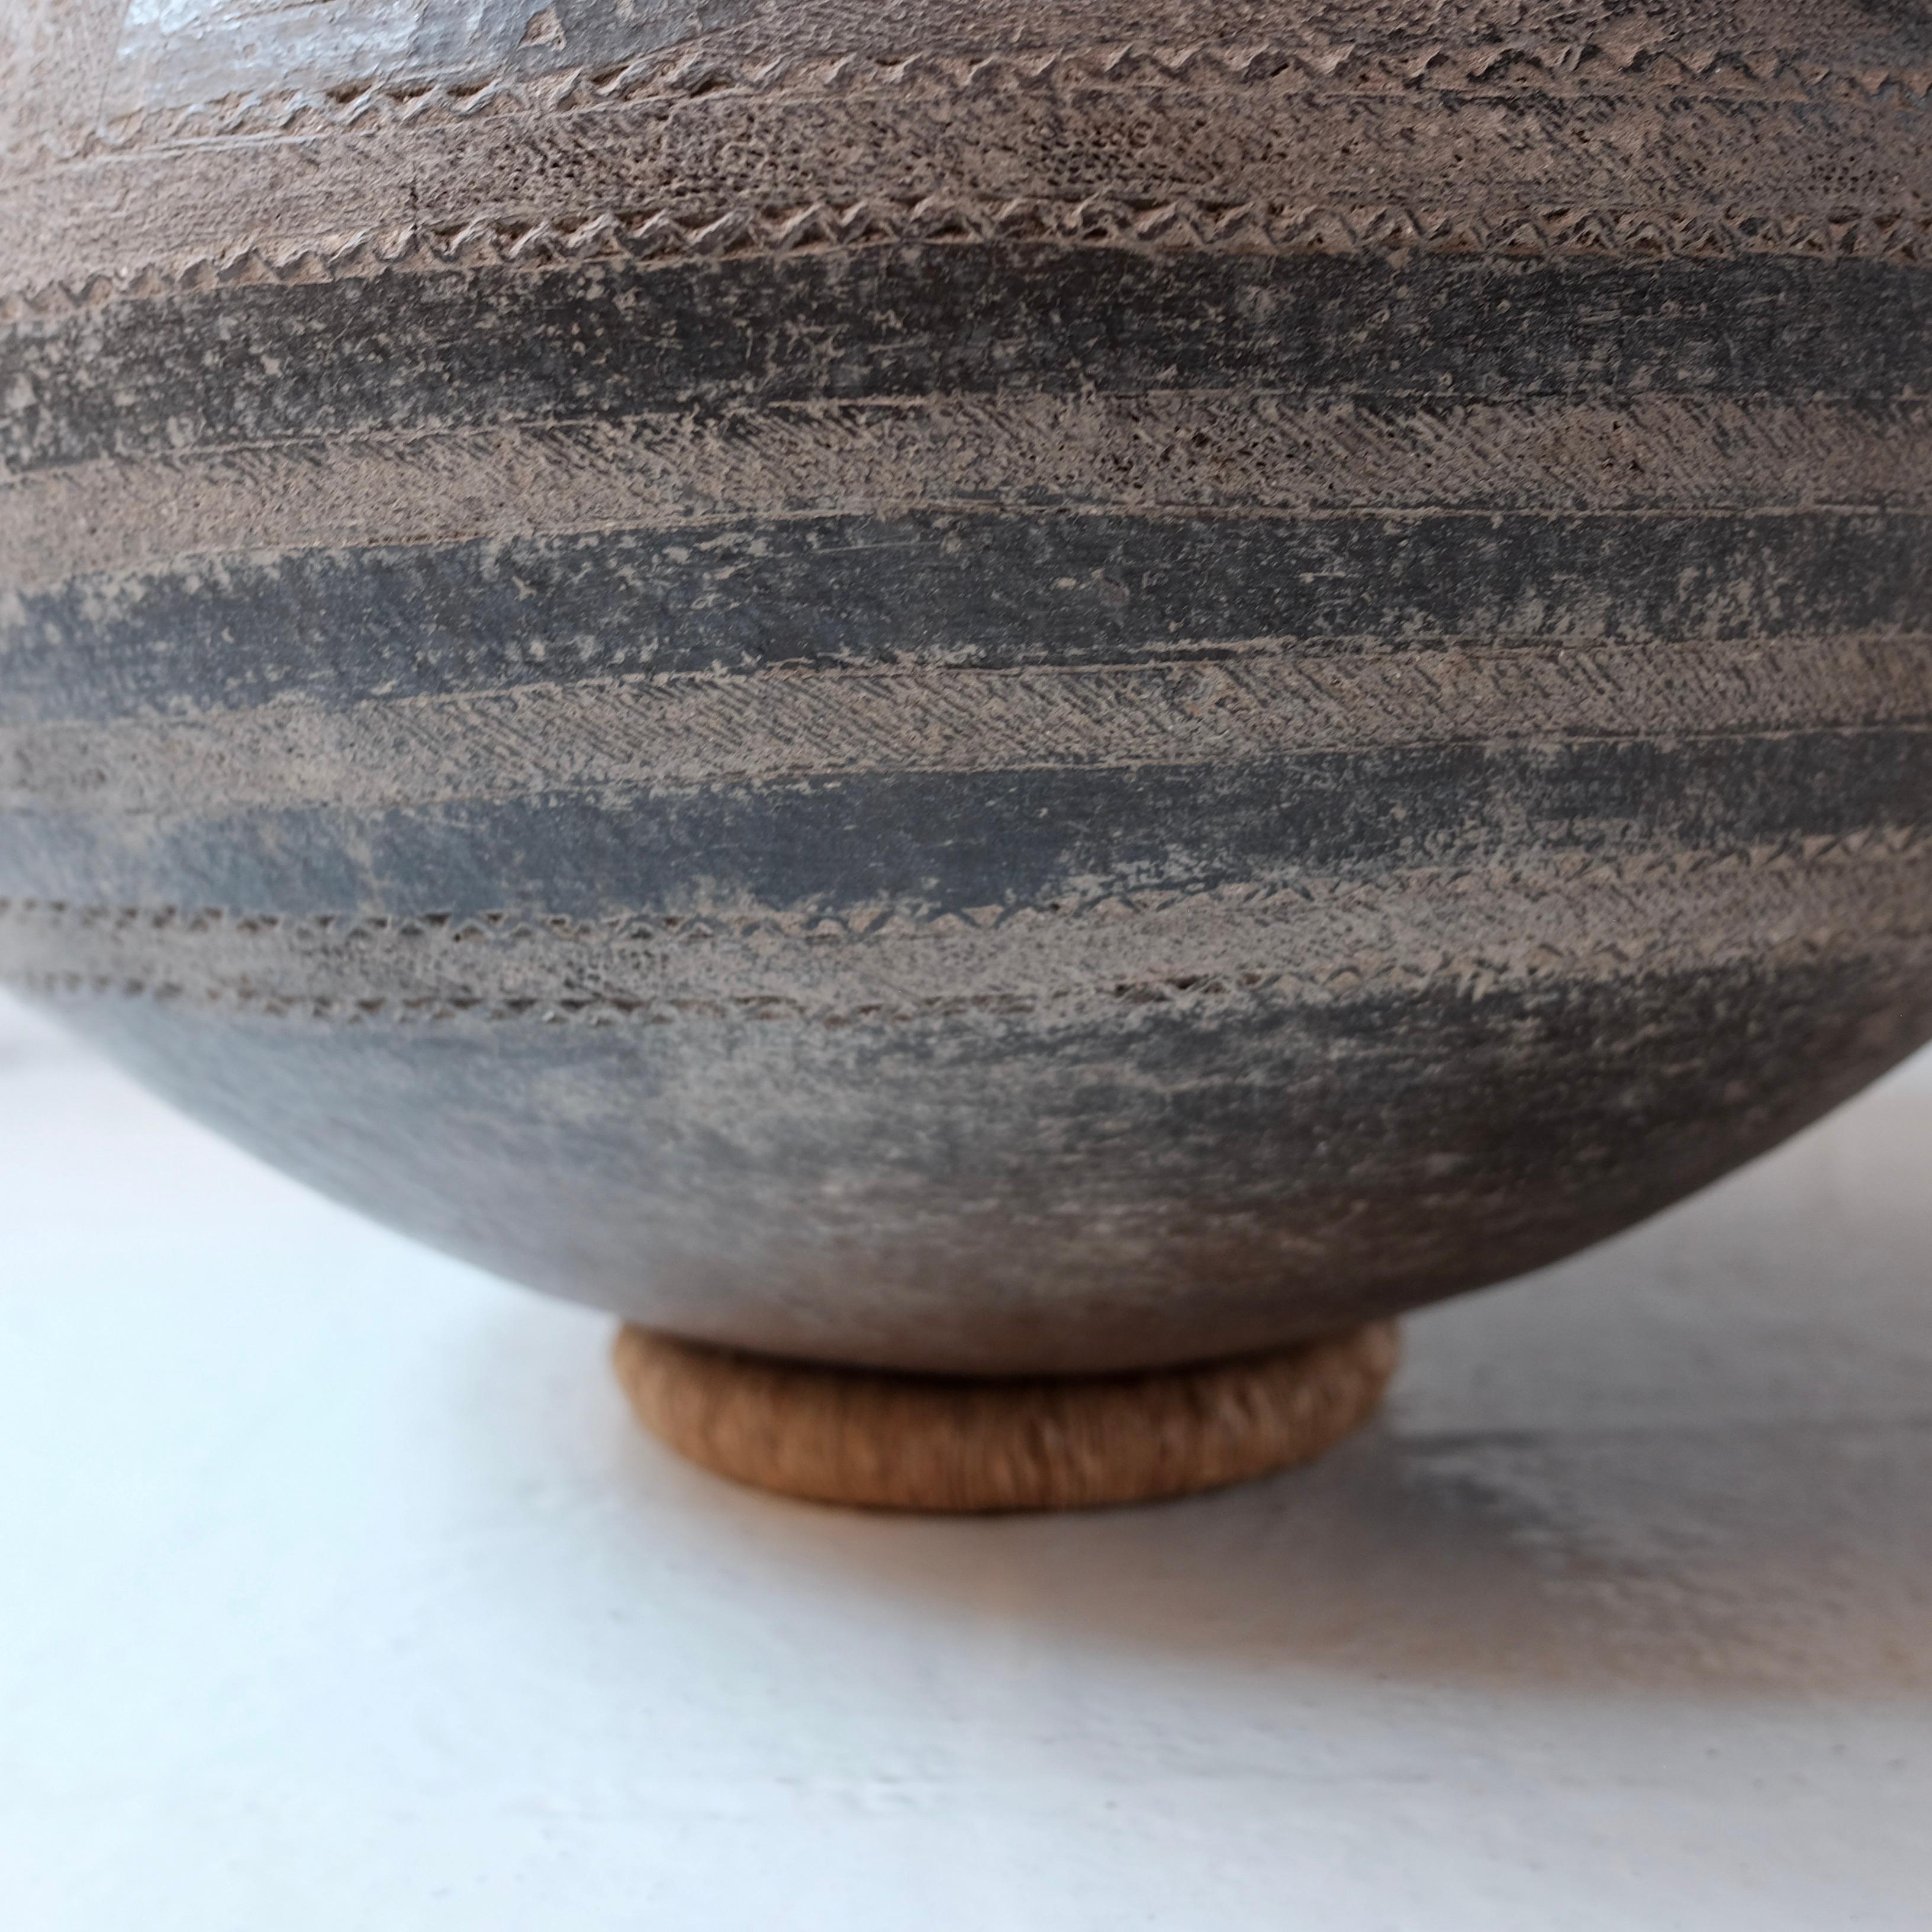 Fired Maconde Water Pot from Mozambique, Africa